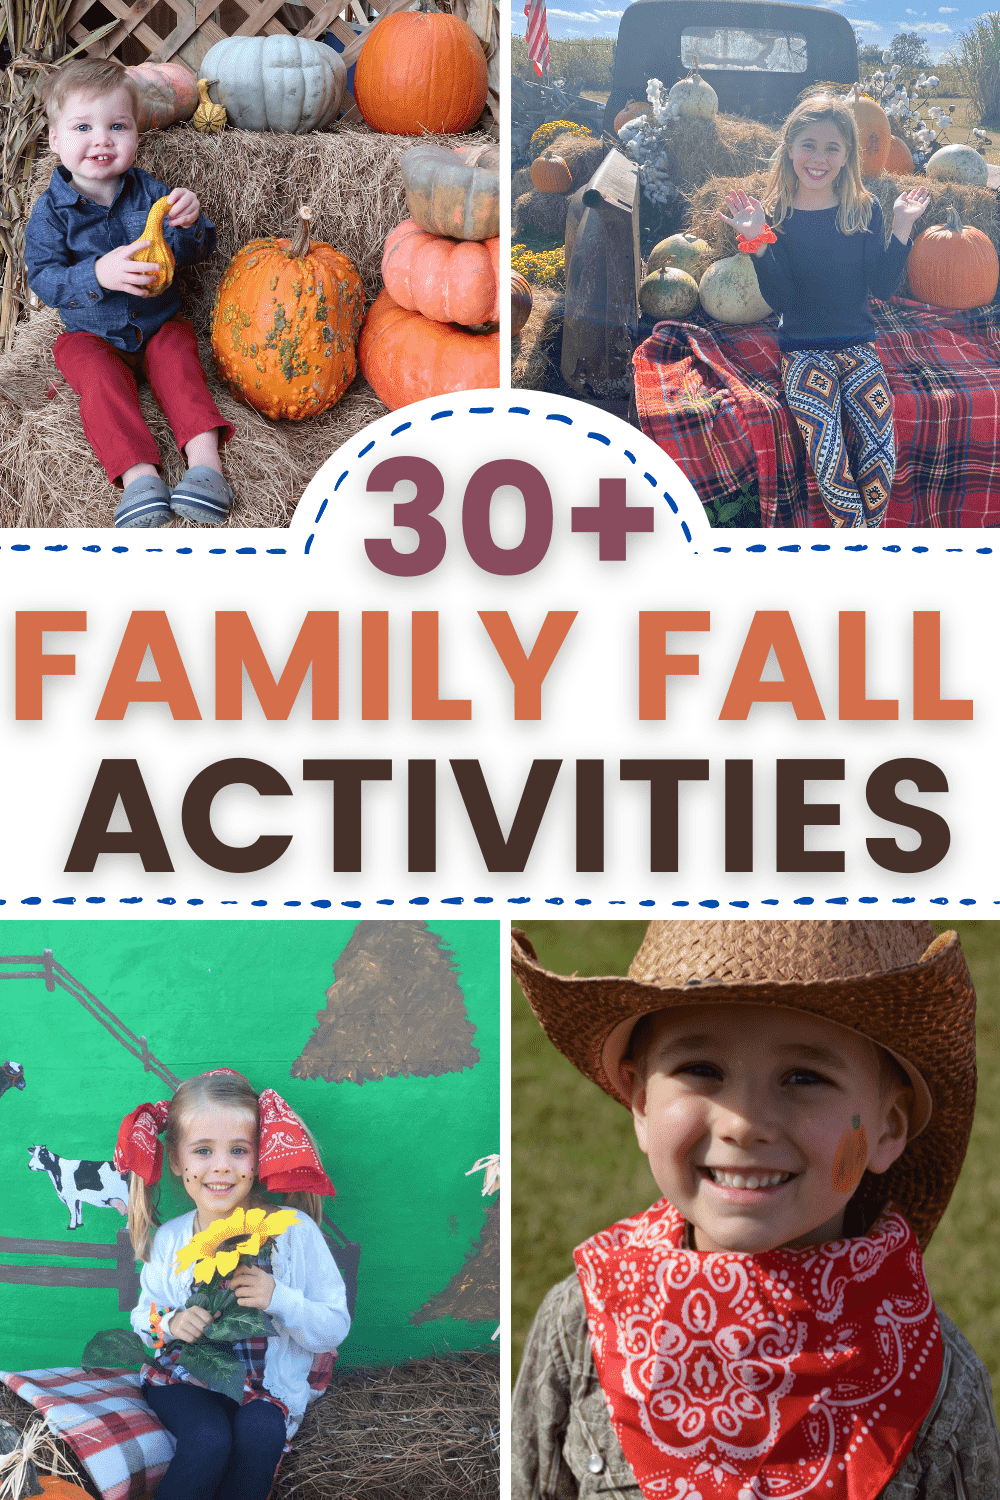 Celebrate the fall season with these easy, fun outdoor activities for kids! Over 30 ideas to add to your fall bucket list! Perfect fun fall activities for kids and the whole family to enjoy together. 